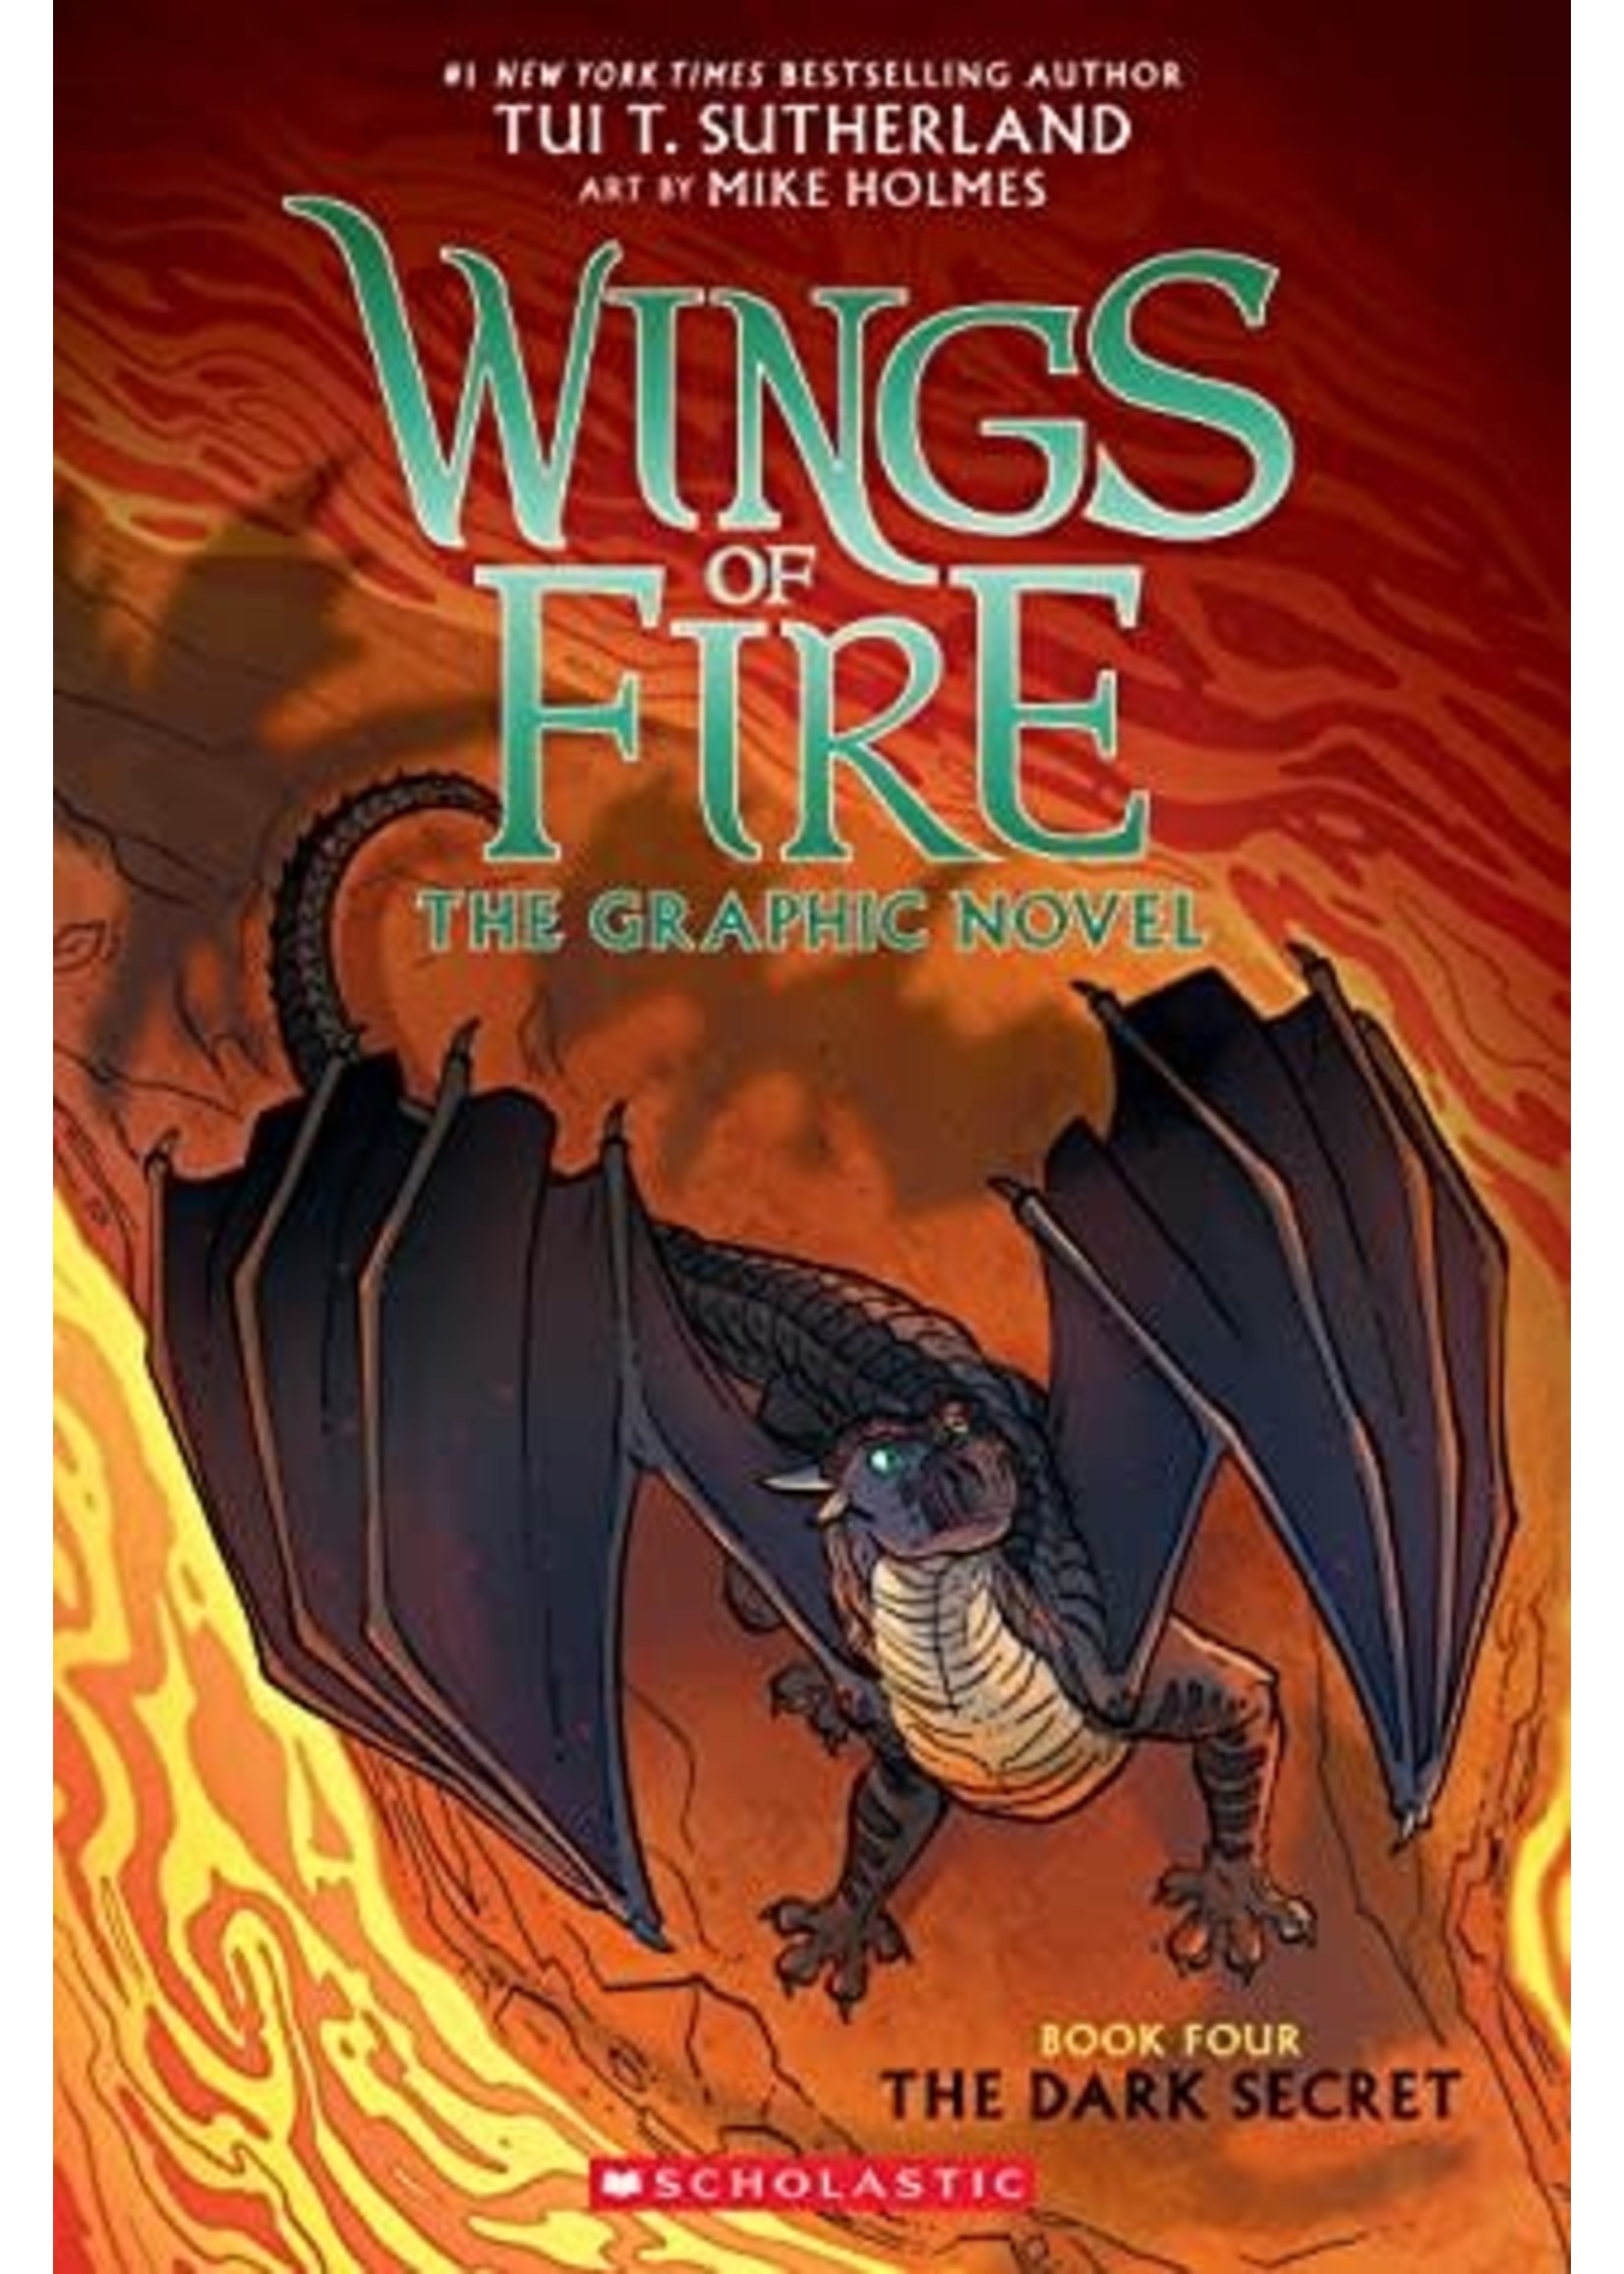 The Dark Secret (Wings of Fire Graphic Novel #4) by Tui T. Sutherland, Mike Holmes